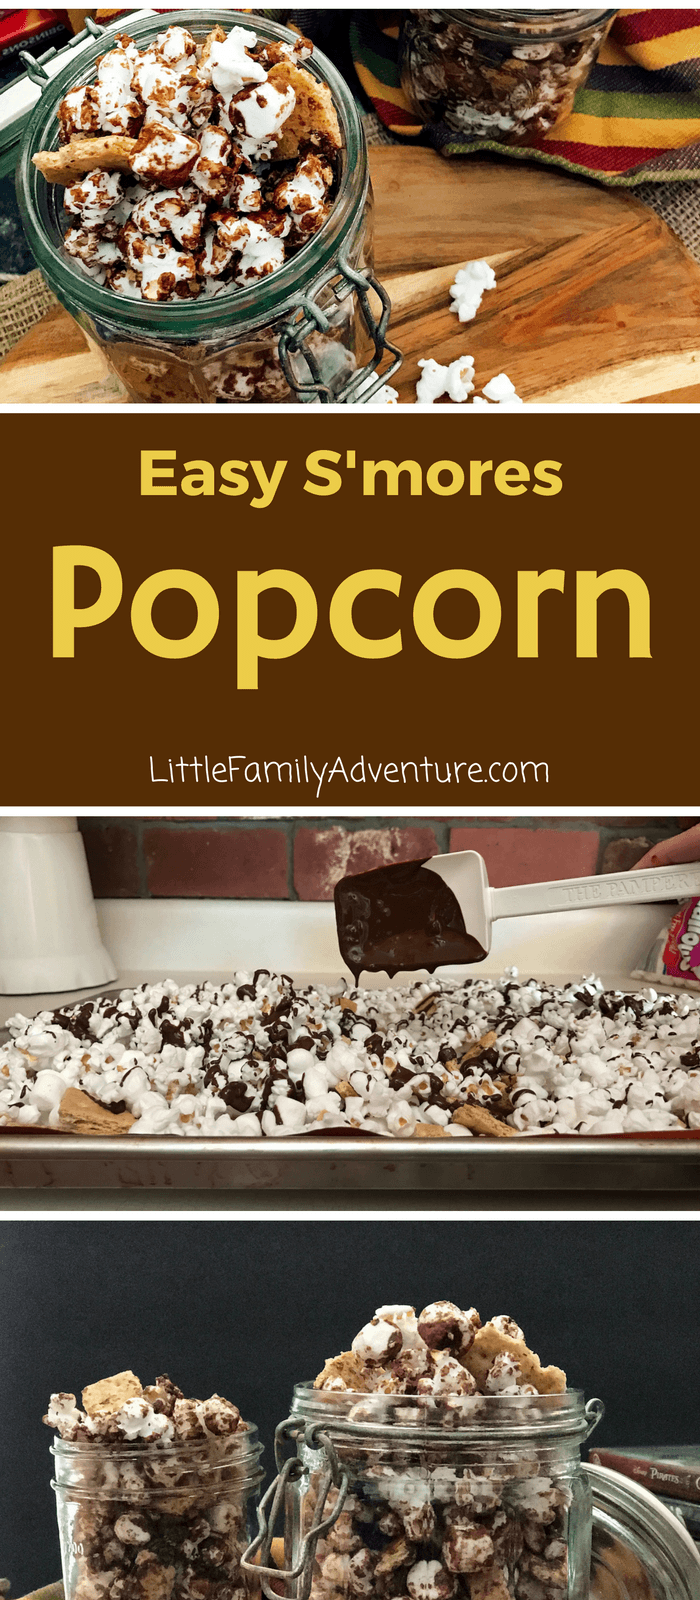 Easy S'mores Popcorn Snack mix - Popcorn drizzled with chocolate topped with more chocolate chips, mini marshmallows, and crushed graham crackers will rock your taste buds! 